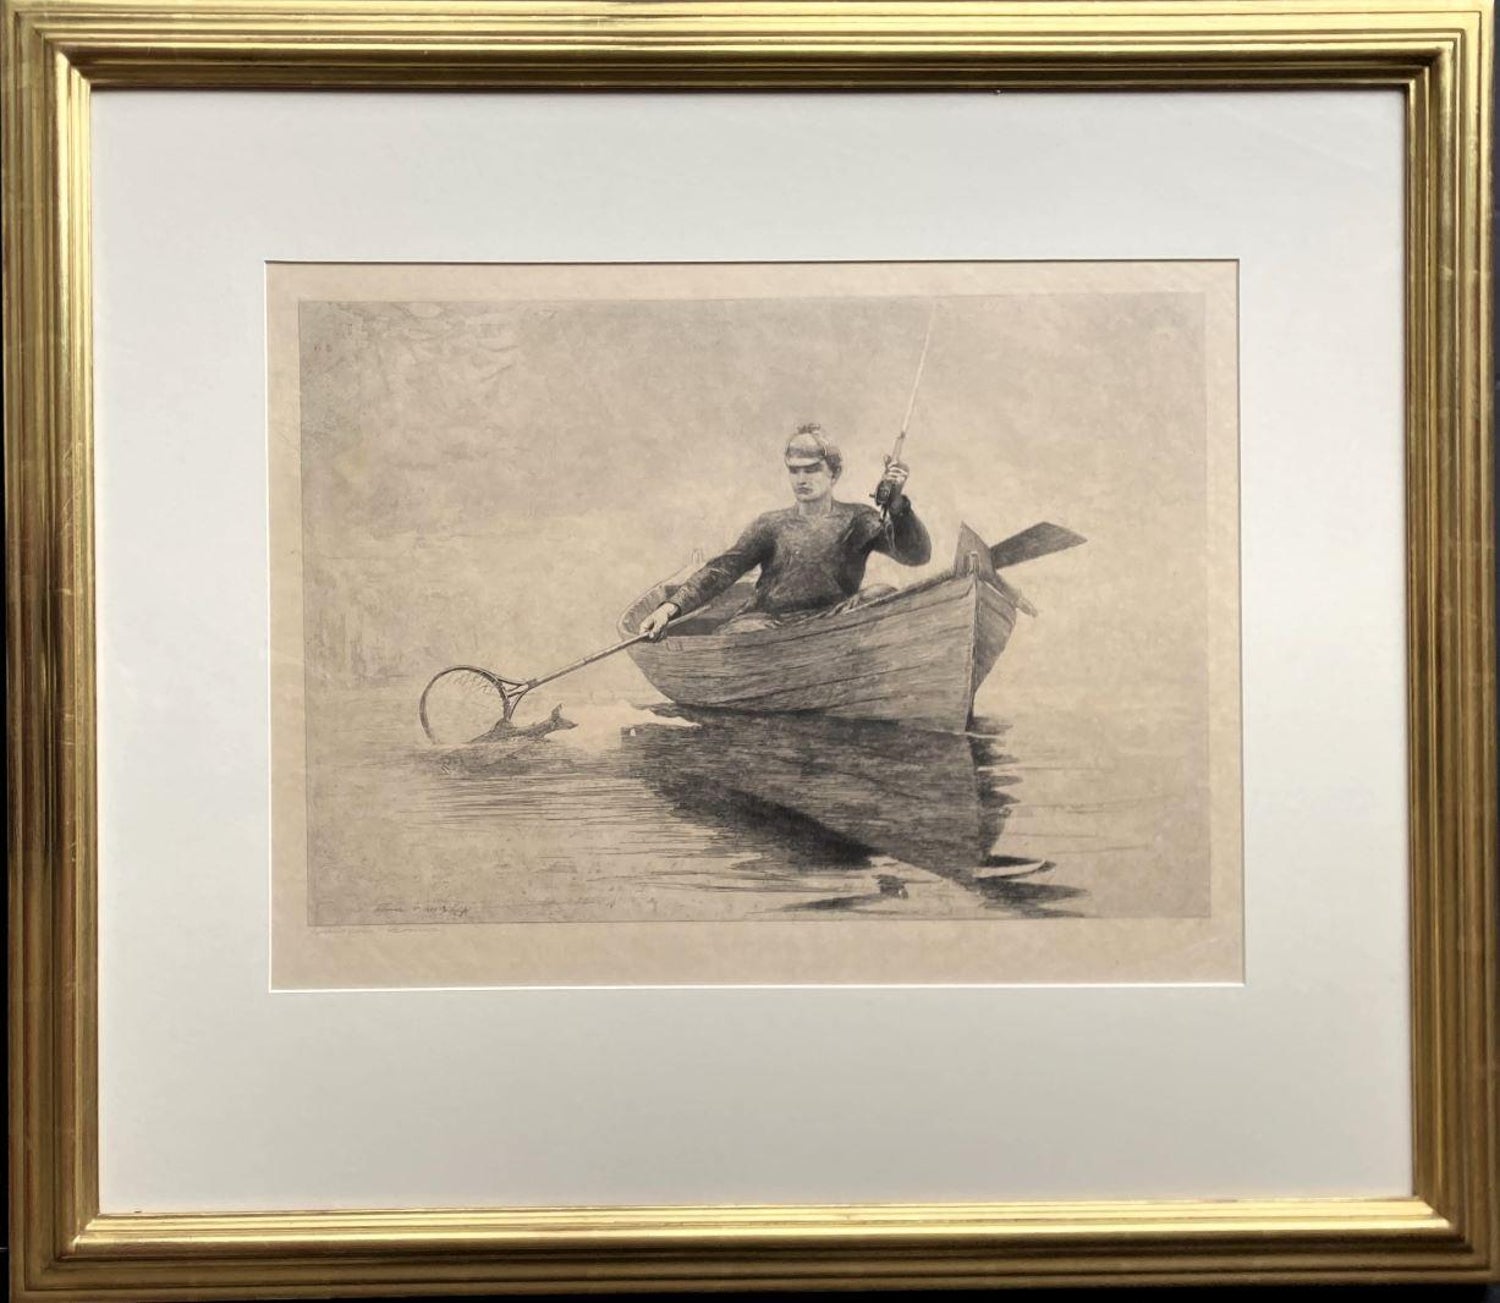 Antique Fly Fishing Art - 19 For Sale on 1stDibs